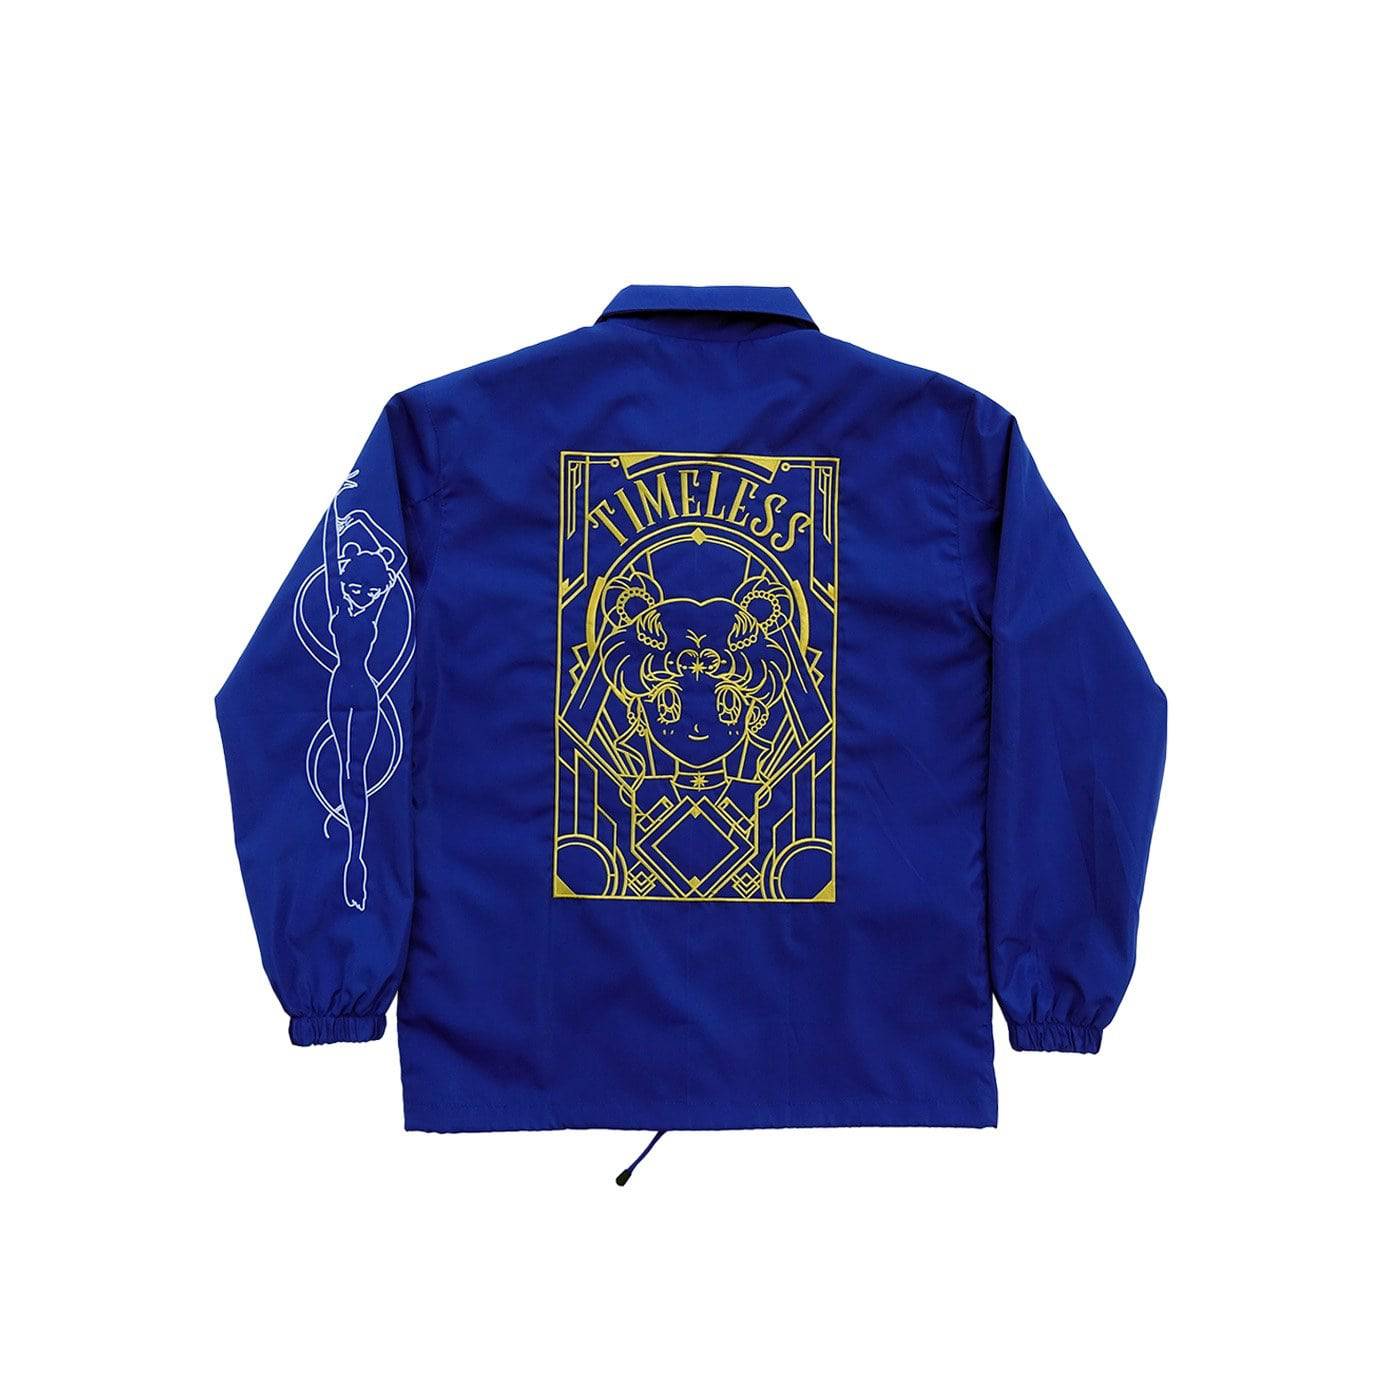 Desired 'Timeless' Embroidered Coach Jacket - NCRT